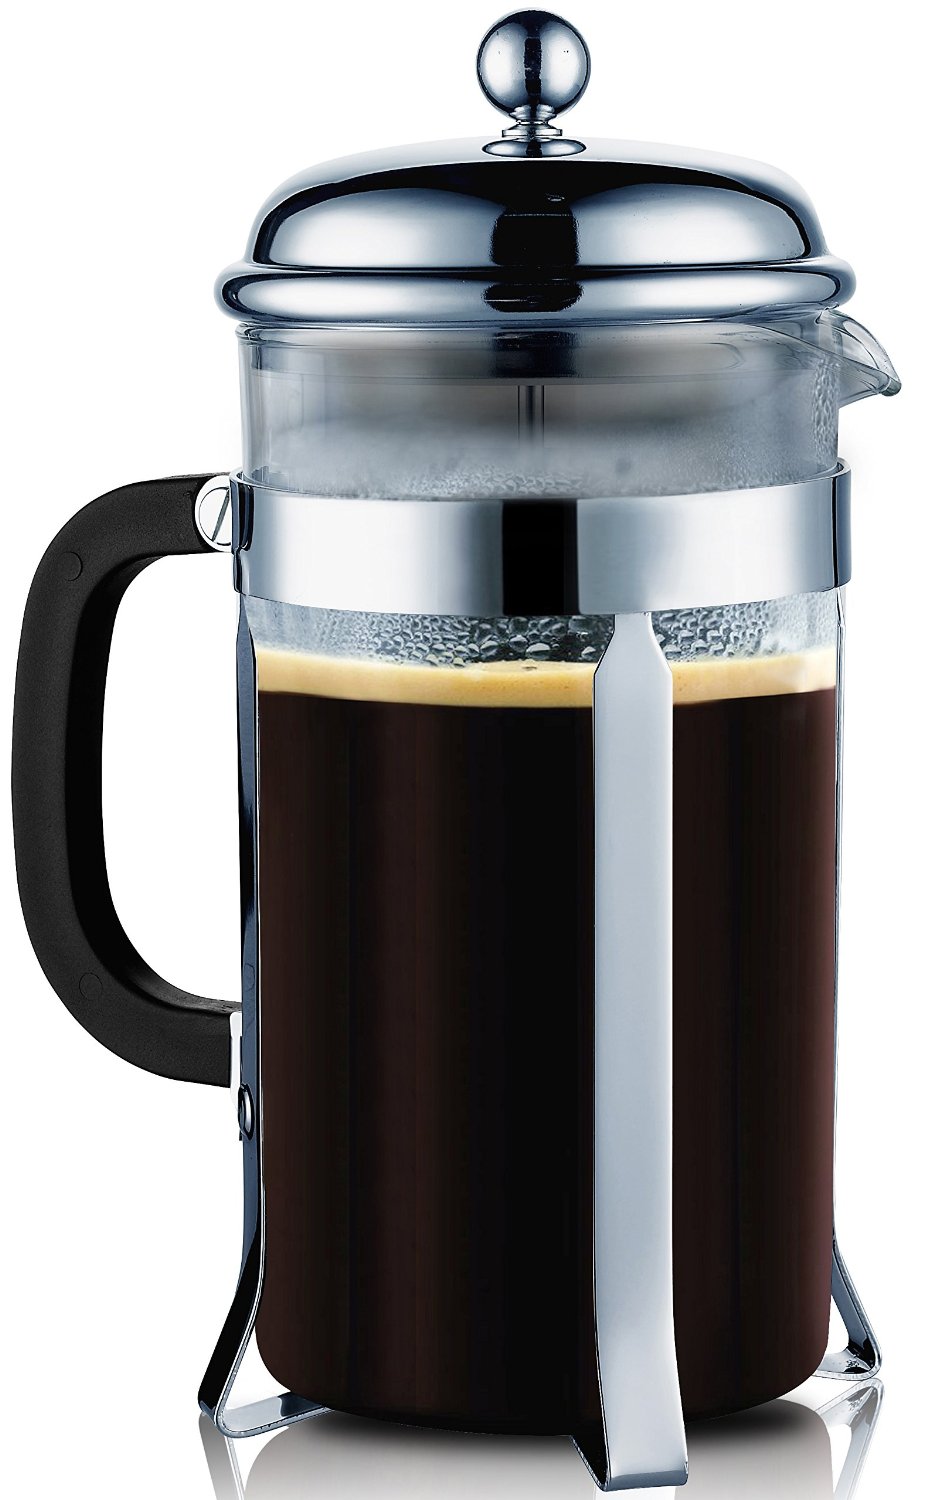 A Sterling Pro French Press coffee maker.